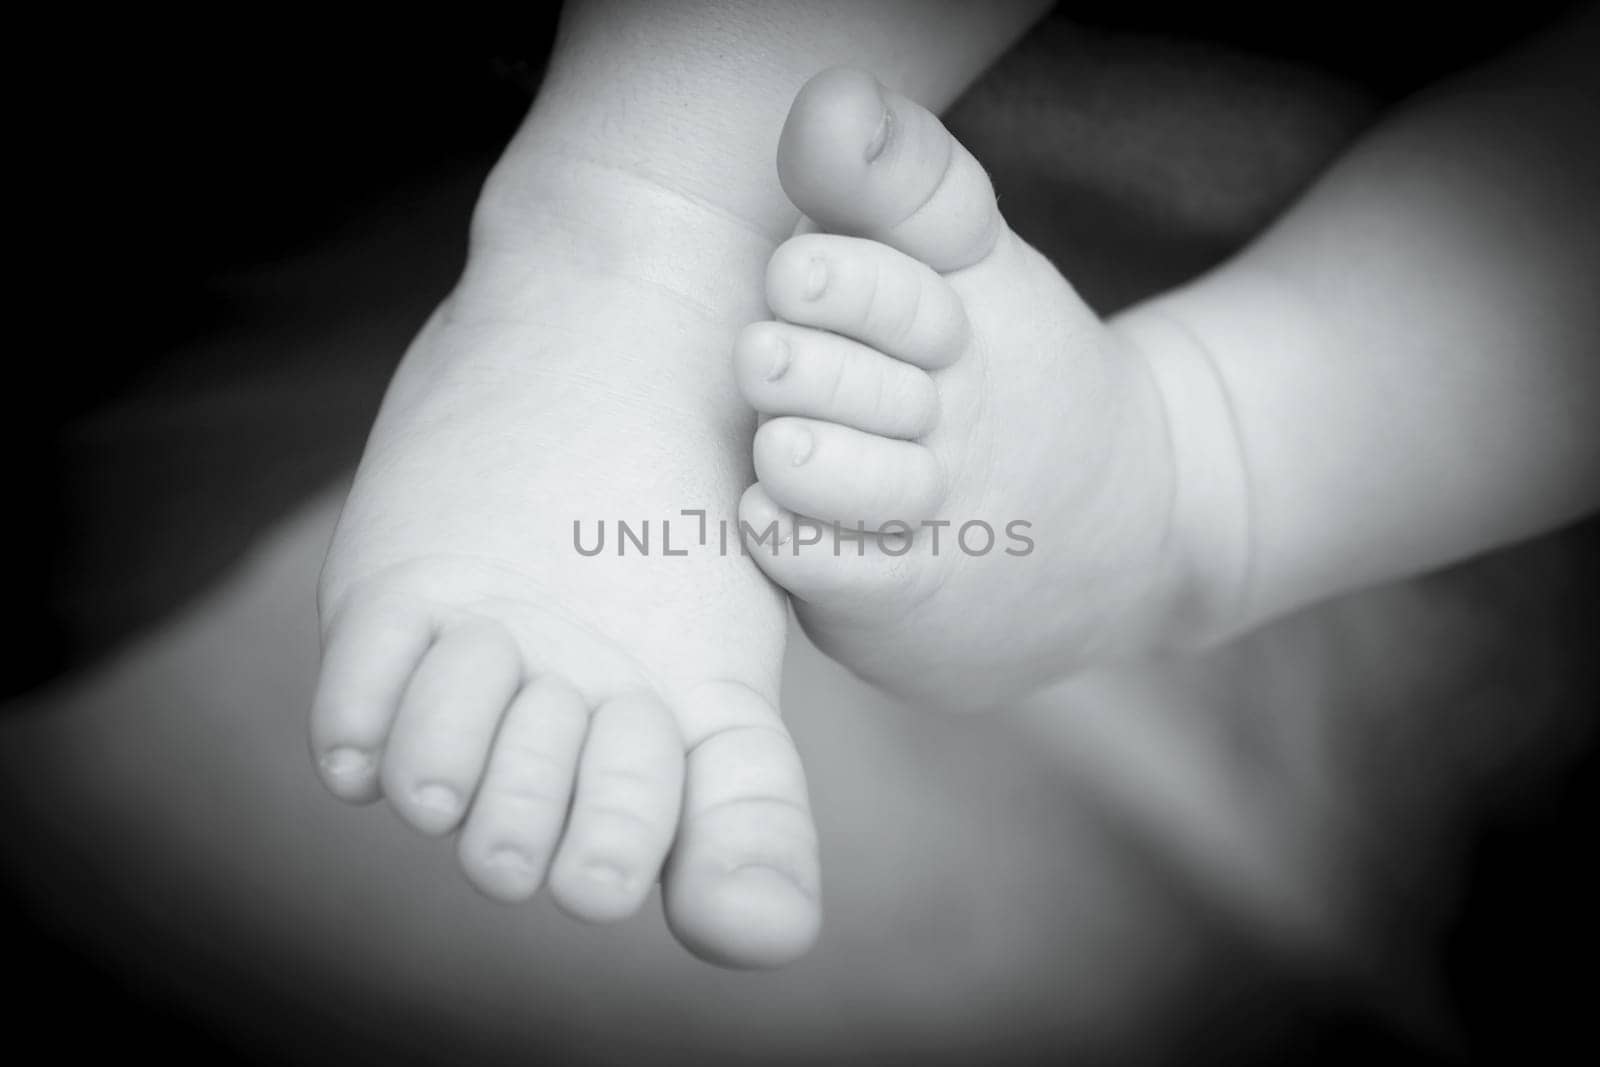 Two month old baby feet on black background. Sweet scene